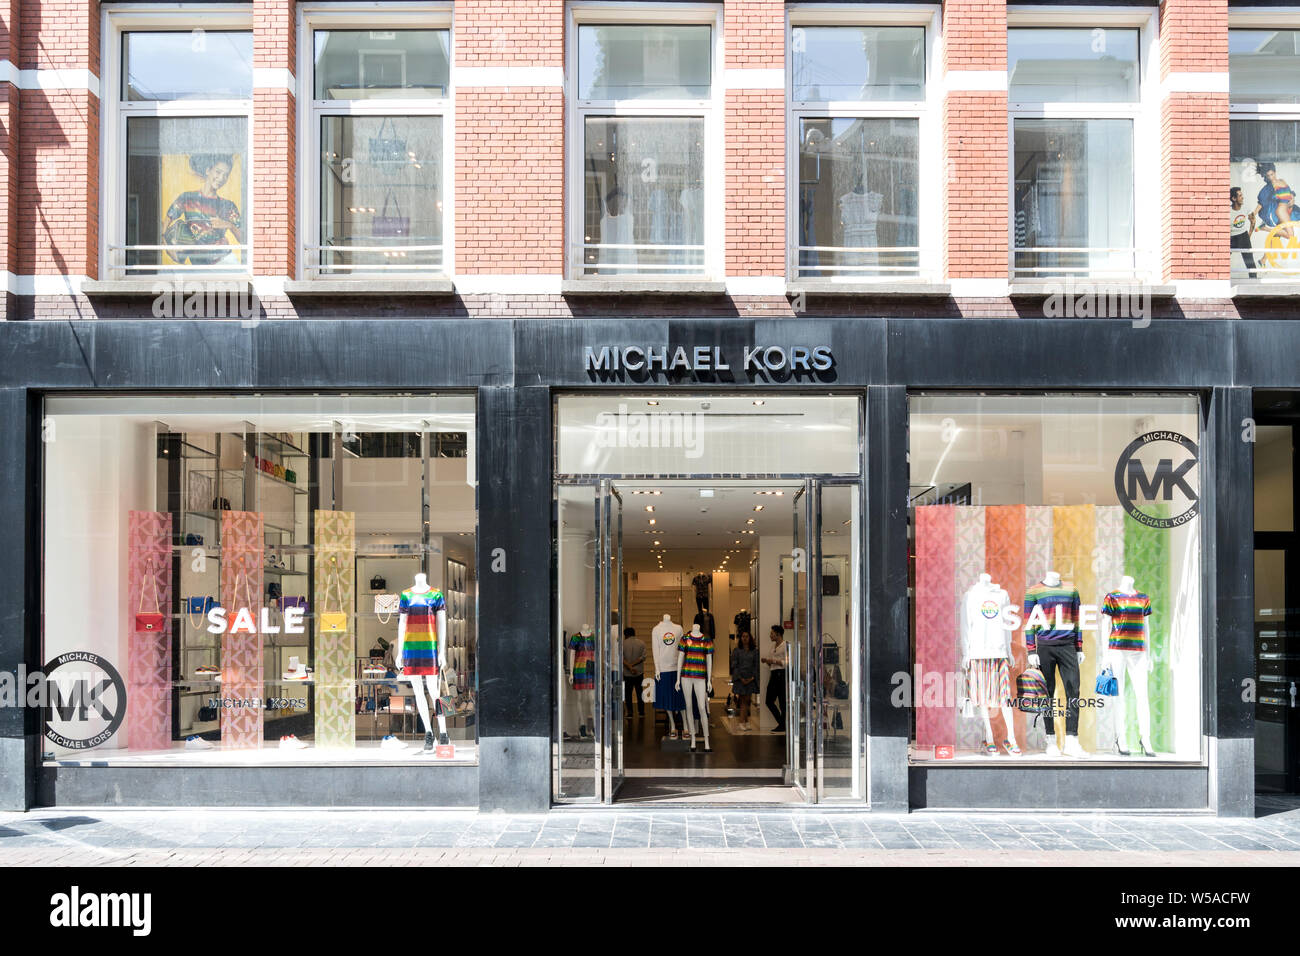 Michael Kors store in Amsterdam, The Netherlands Stock Photo - Alamy